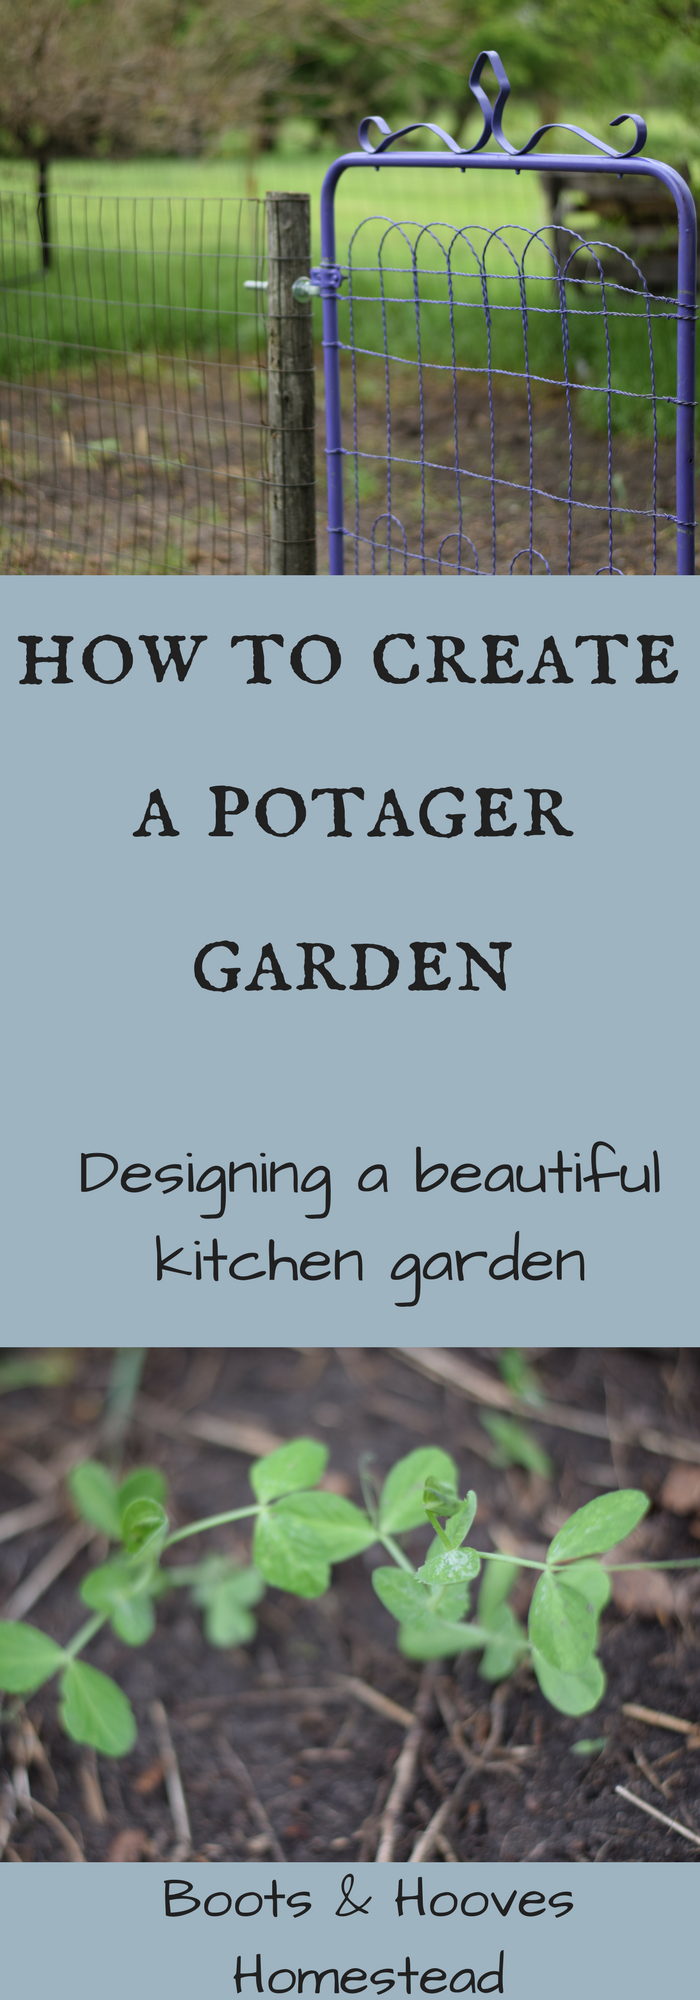 How to Create a Potager Garden - Boots & Hooves Homestead -   25 french kitchen garden
 ideas